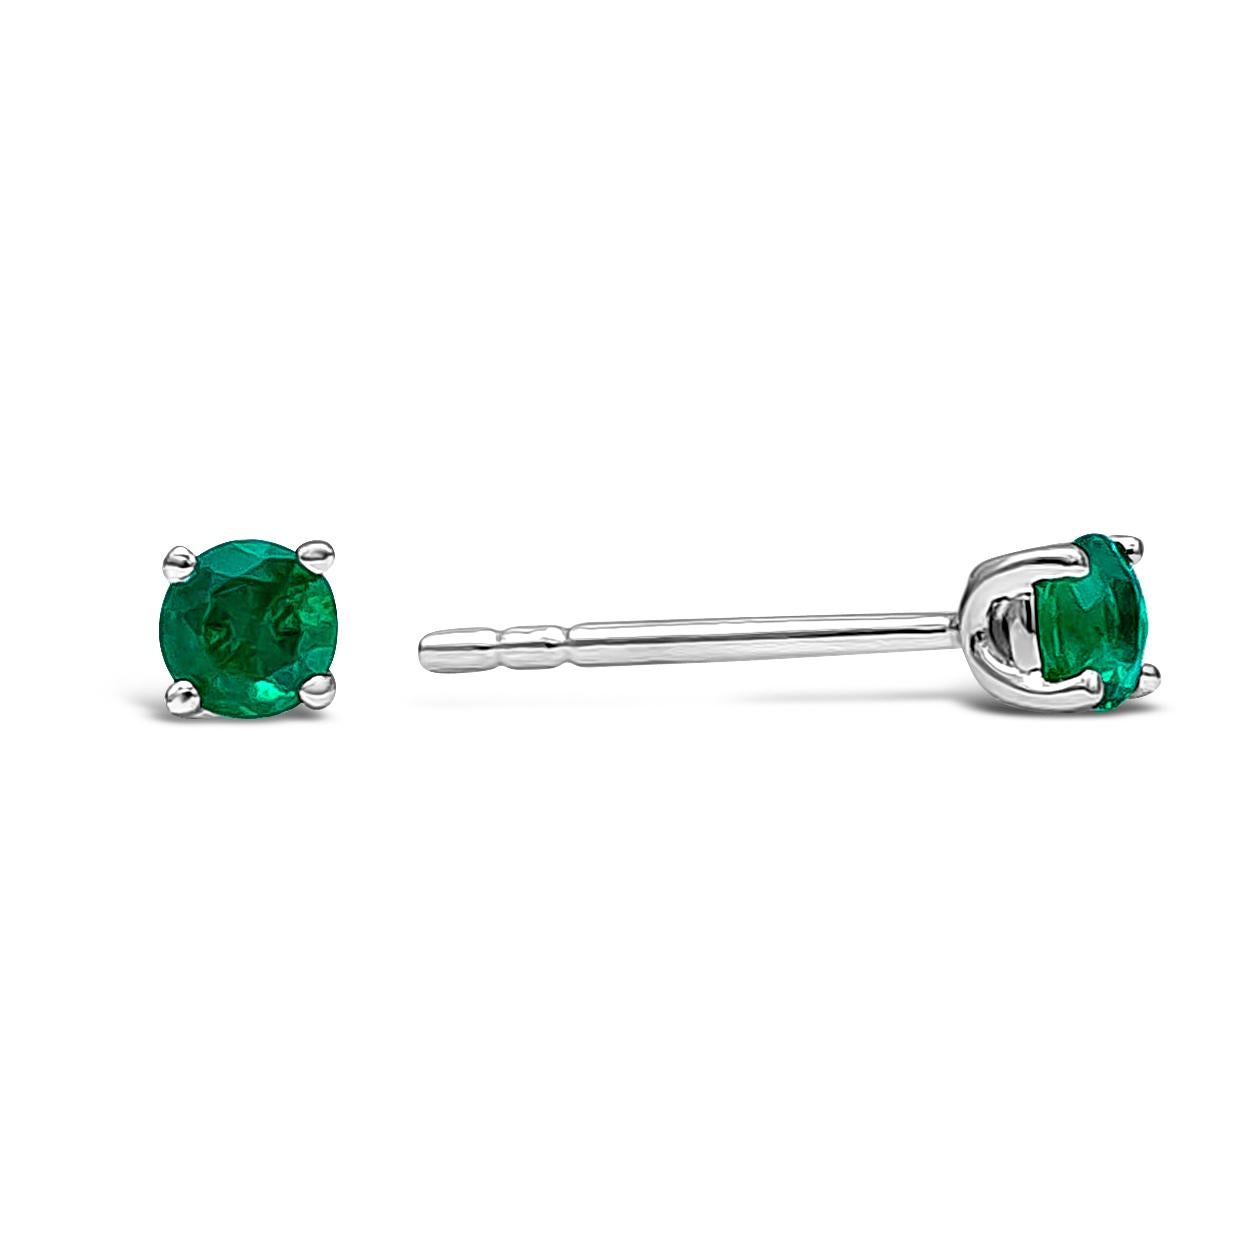 A timeless stud earrings design, showcasing 0.27 carat total of round green emeralds. Set on a classic four-prong setting made of 18K white gold.

Roman Malakov is a custom house, specializing in creating anything you can imagine. If you would like